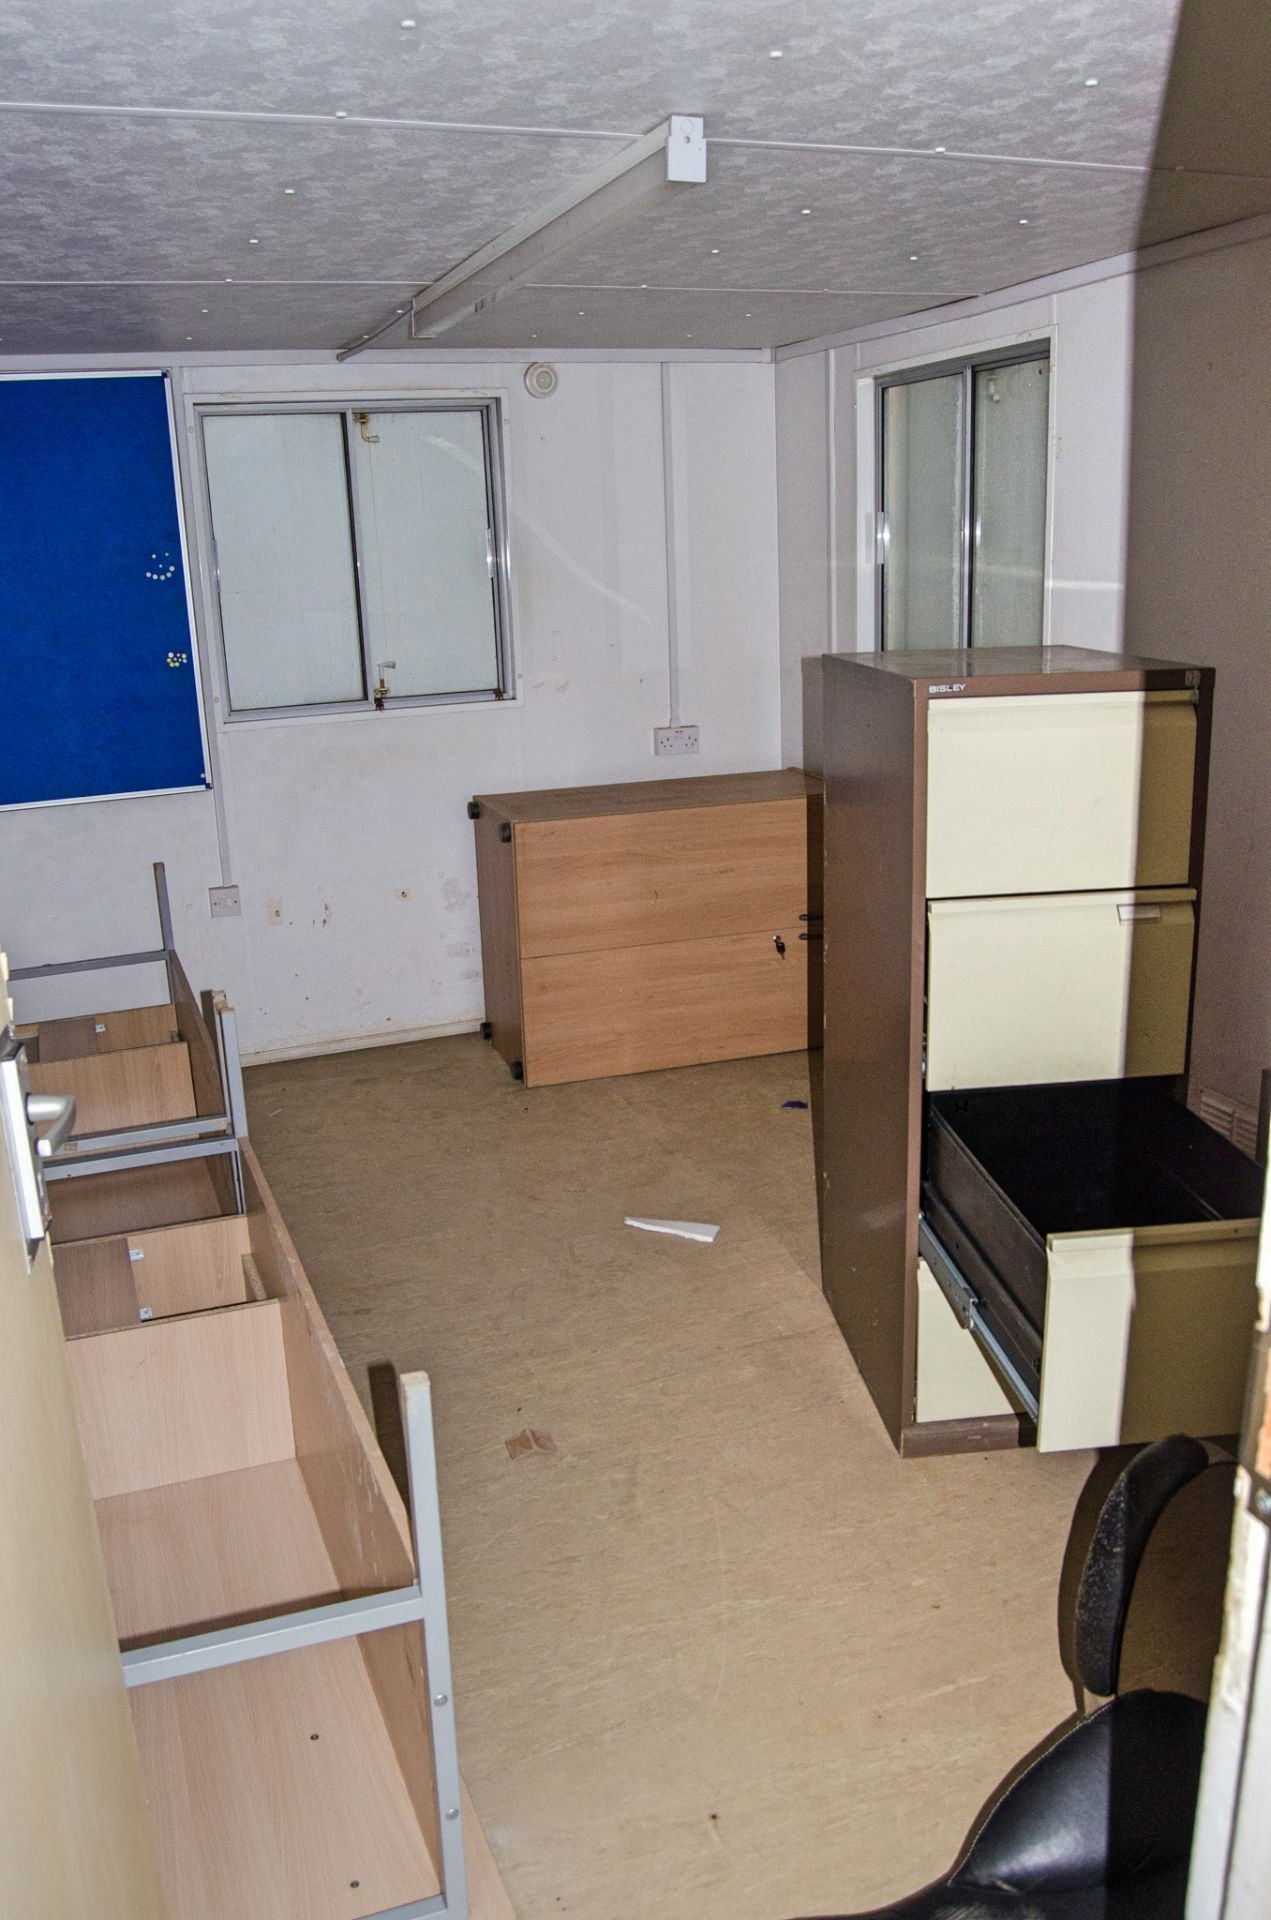 32ft x 10ft steel anti-vandal office site unit Comprising of: lobby area & 2 - offices A581030 ** No - Image 7 of 7